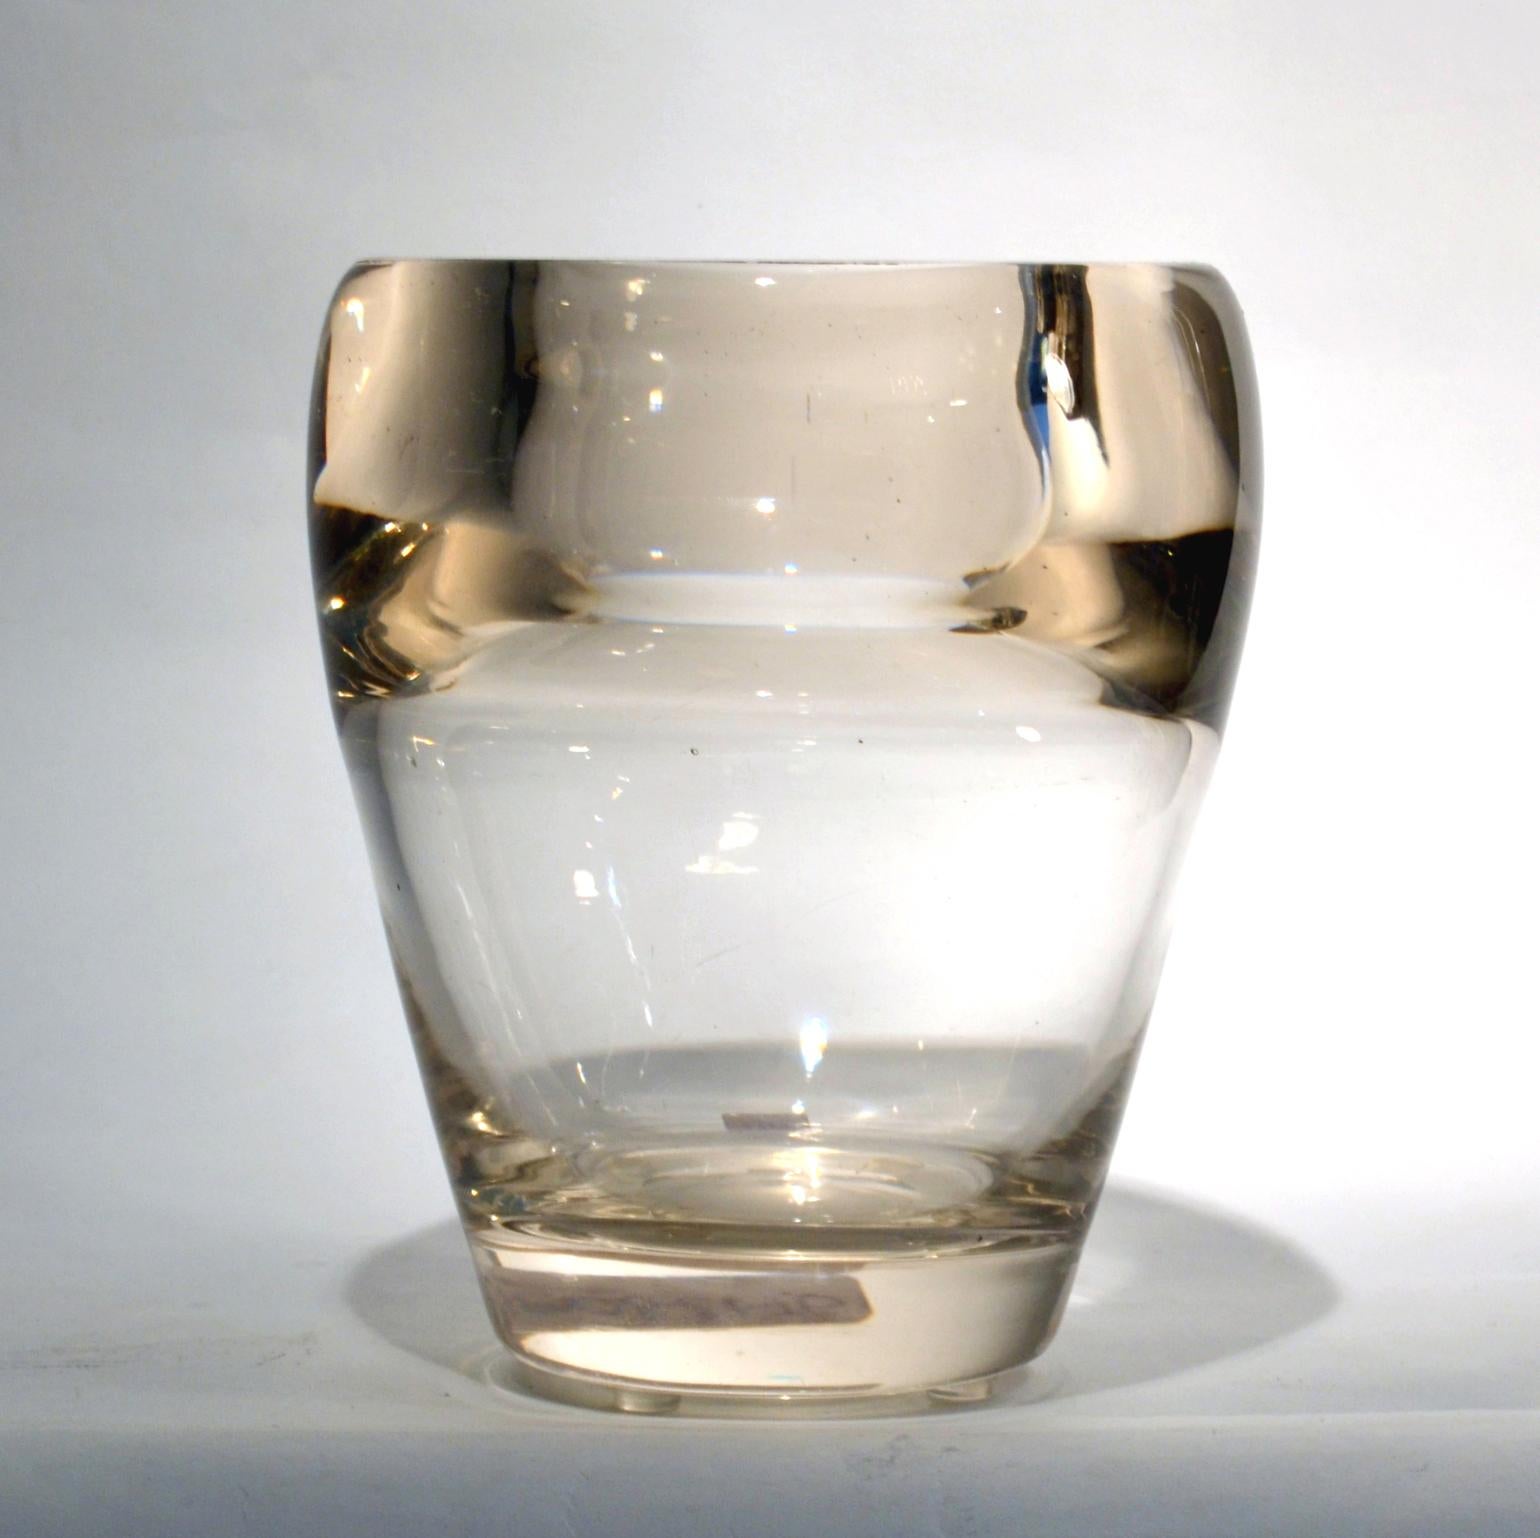 Hand blown heavy weighted vase in clear glass over flowing in lemon border by Floris Meydam, the Chief of design at Leerdam glass works, The Netherlands 1960's. The vase is marked with Acid stamp with the mention 